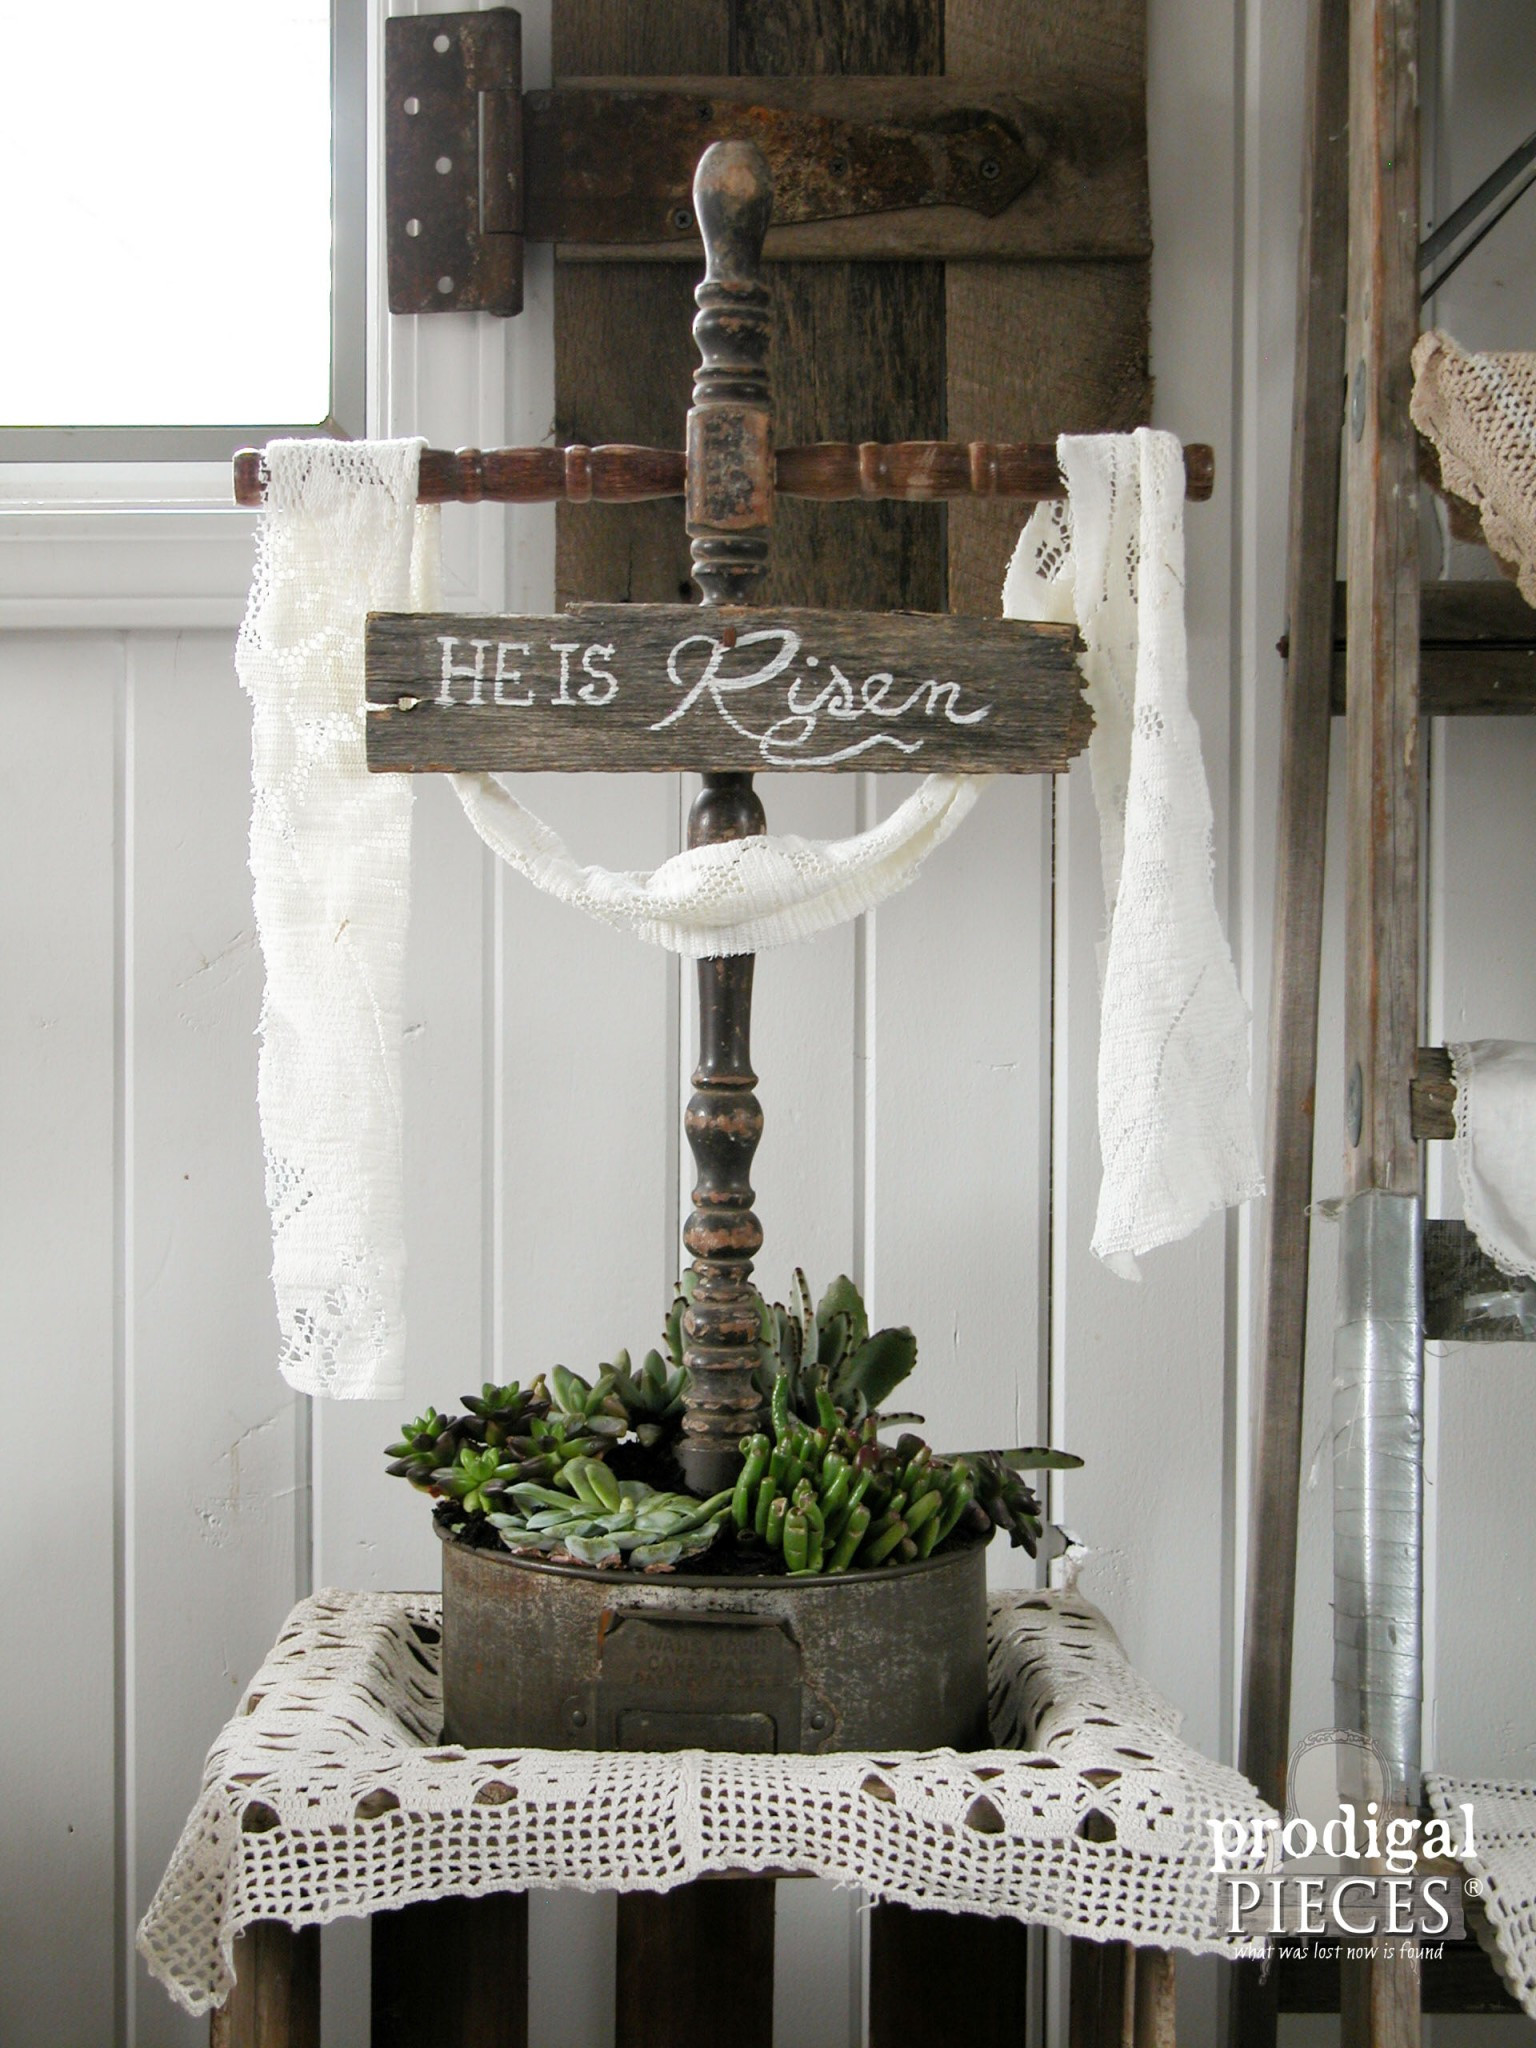 DIY Easter Christian Table Decorations
 Easter Cross made from Repurposed Materials Prodigal Pieces